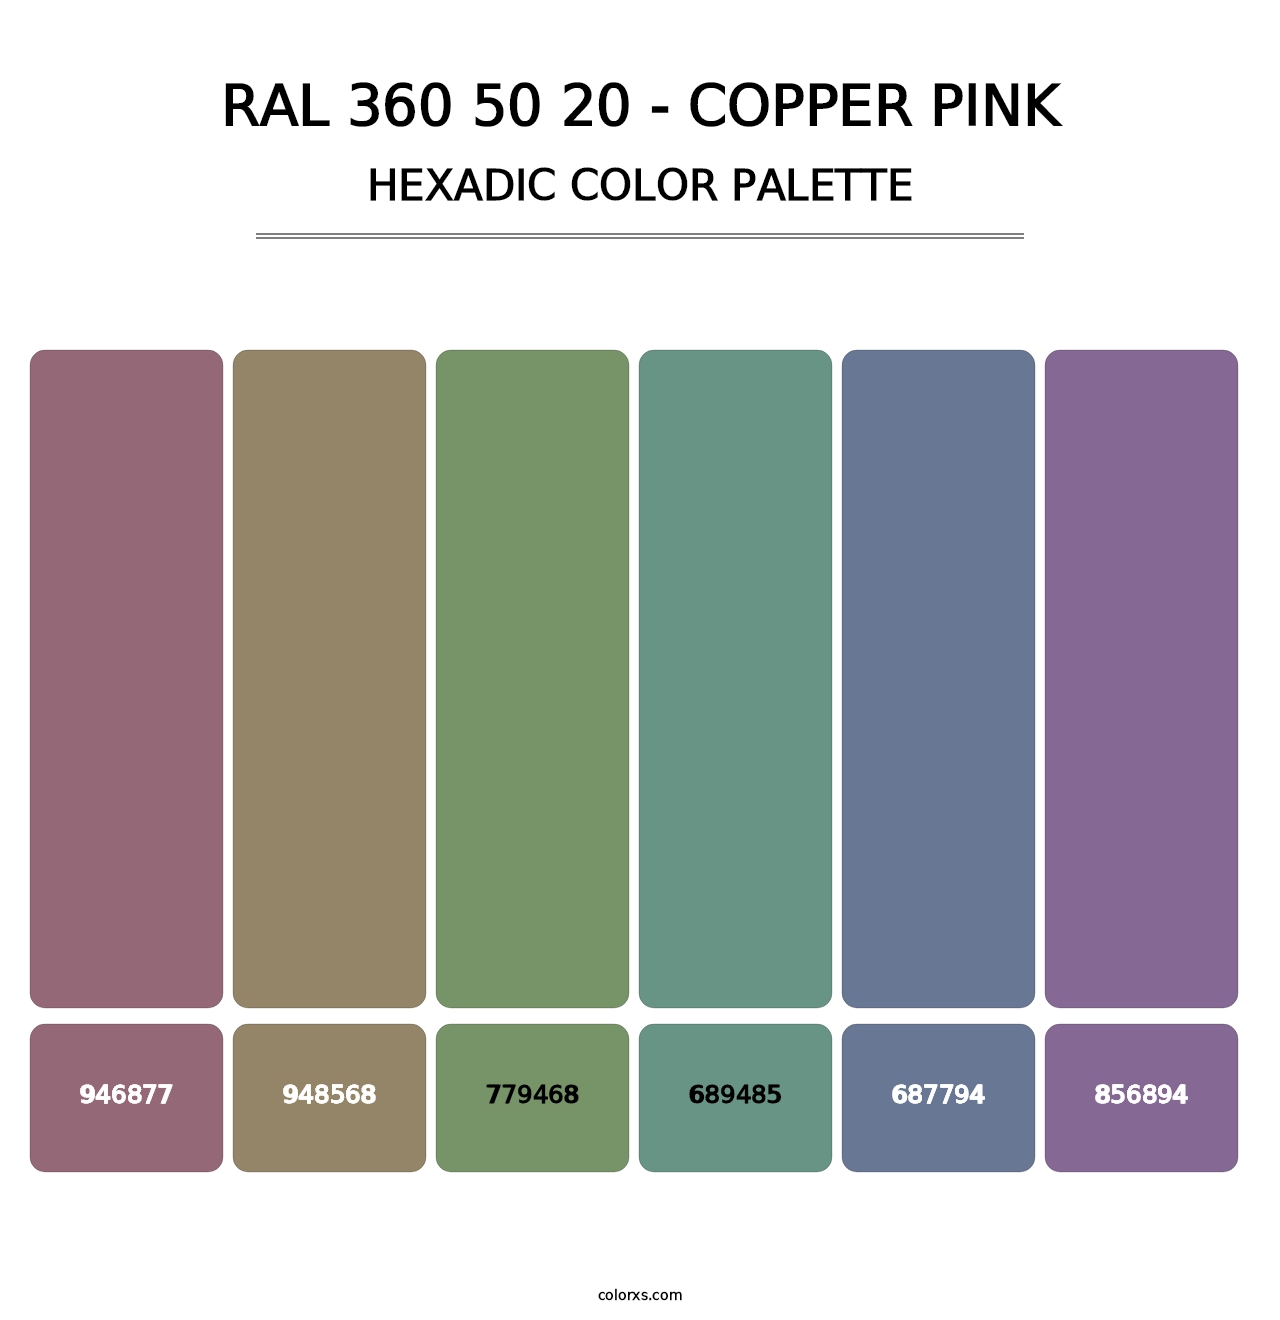 RAL 360 50 20 - Copper Pink - Hexadic Color Palette